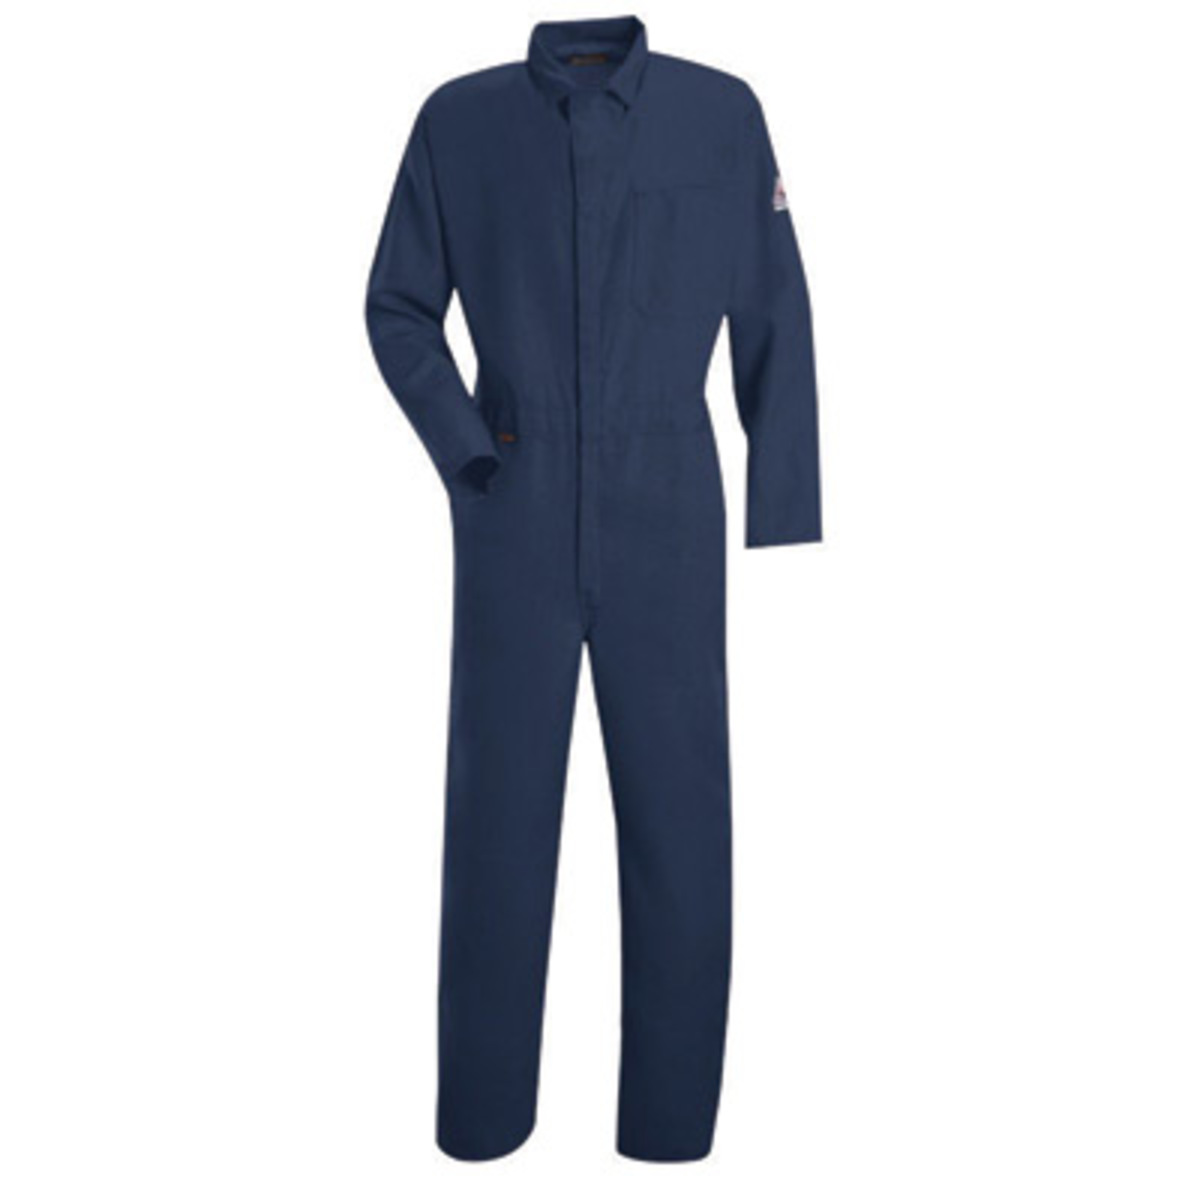 Stanco Safety Products™ 2X Tall Navy Blue Nomex® IIIA Arc Rated Flame Resistant Coveralls With Concealed 2-Way Front Zipper Clos